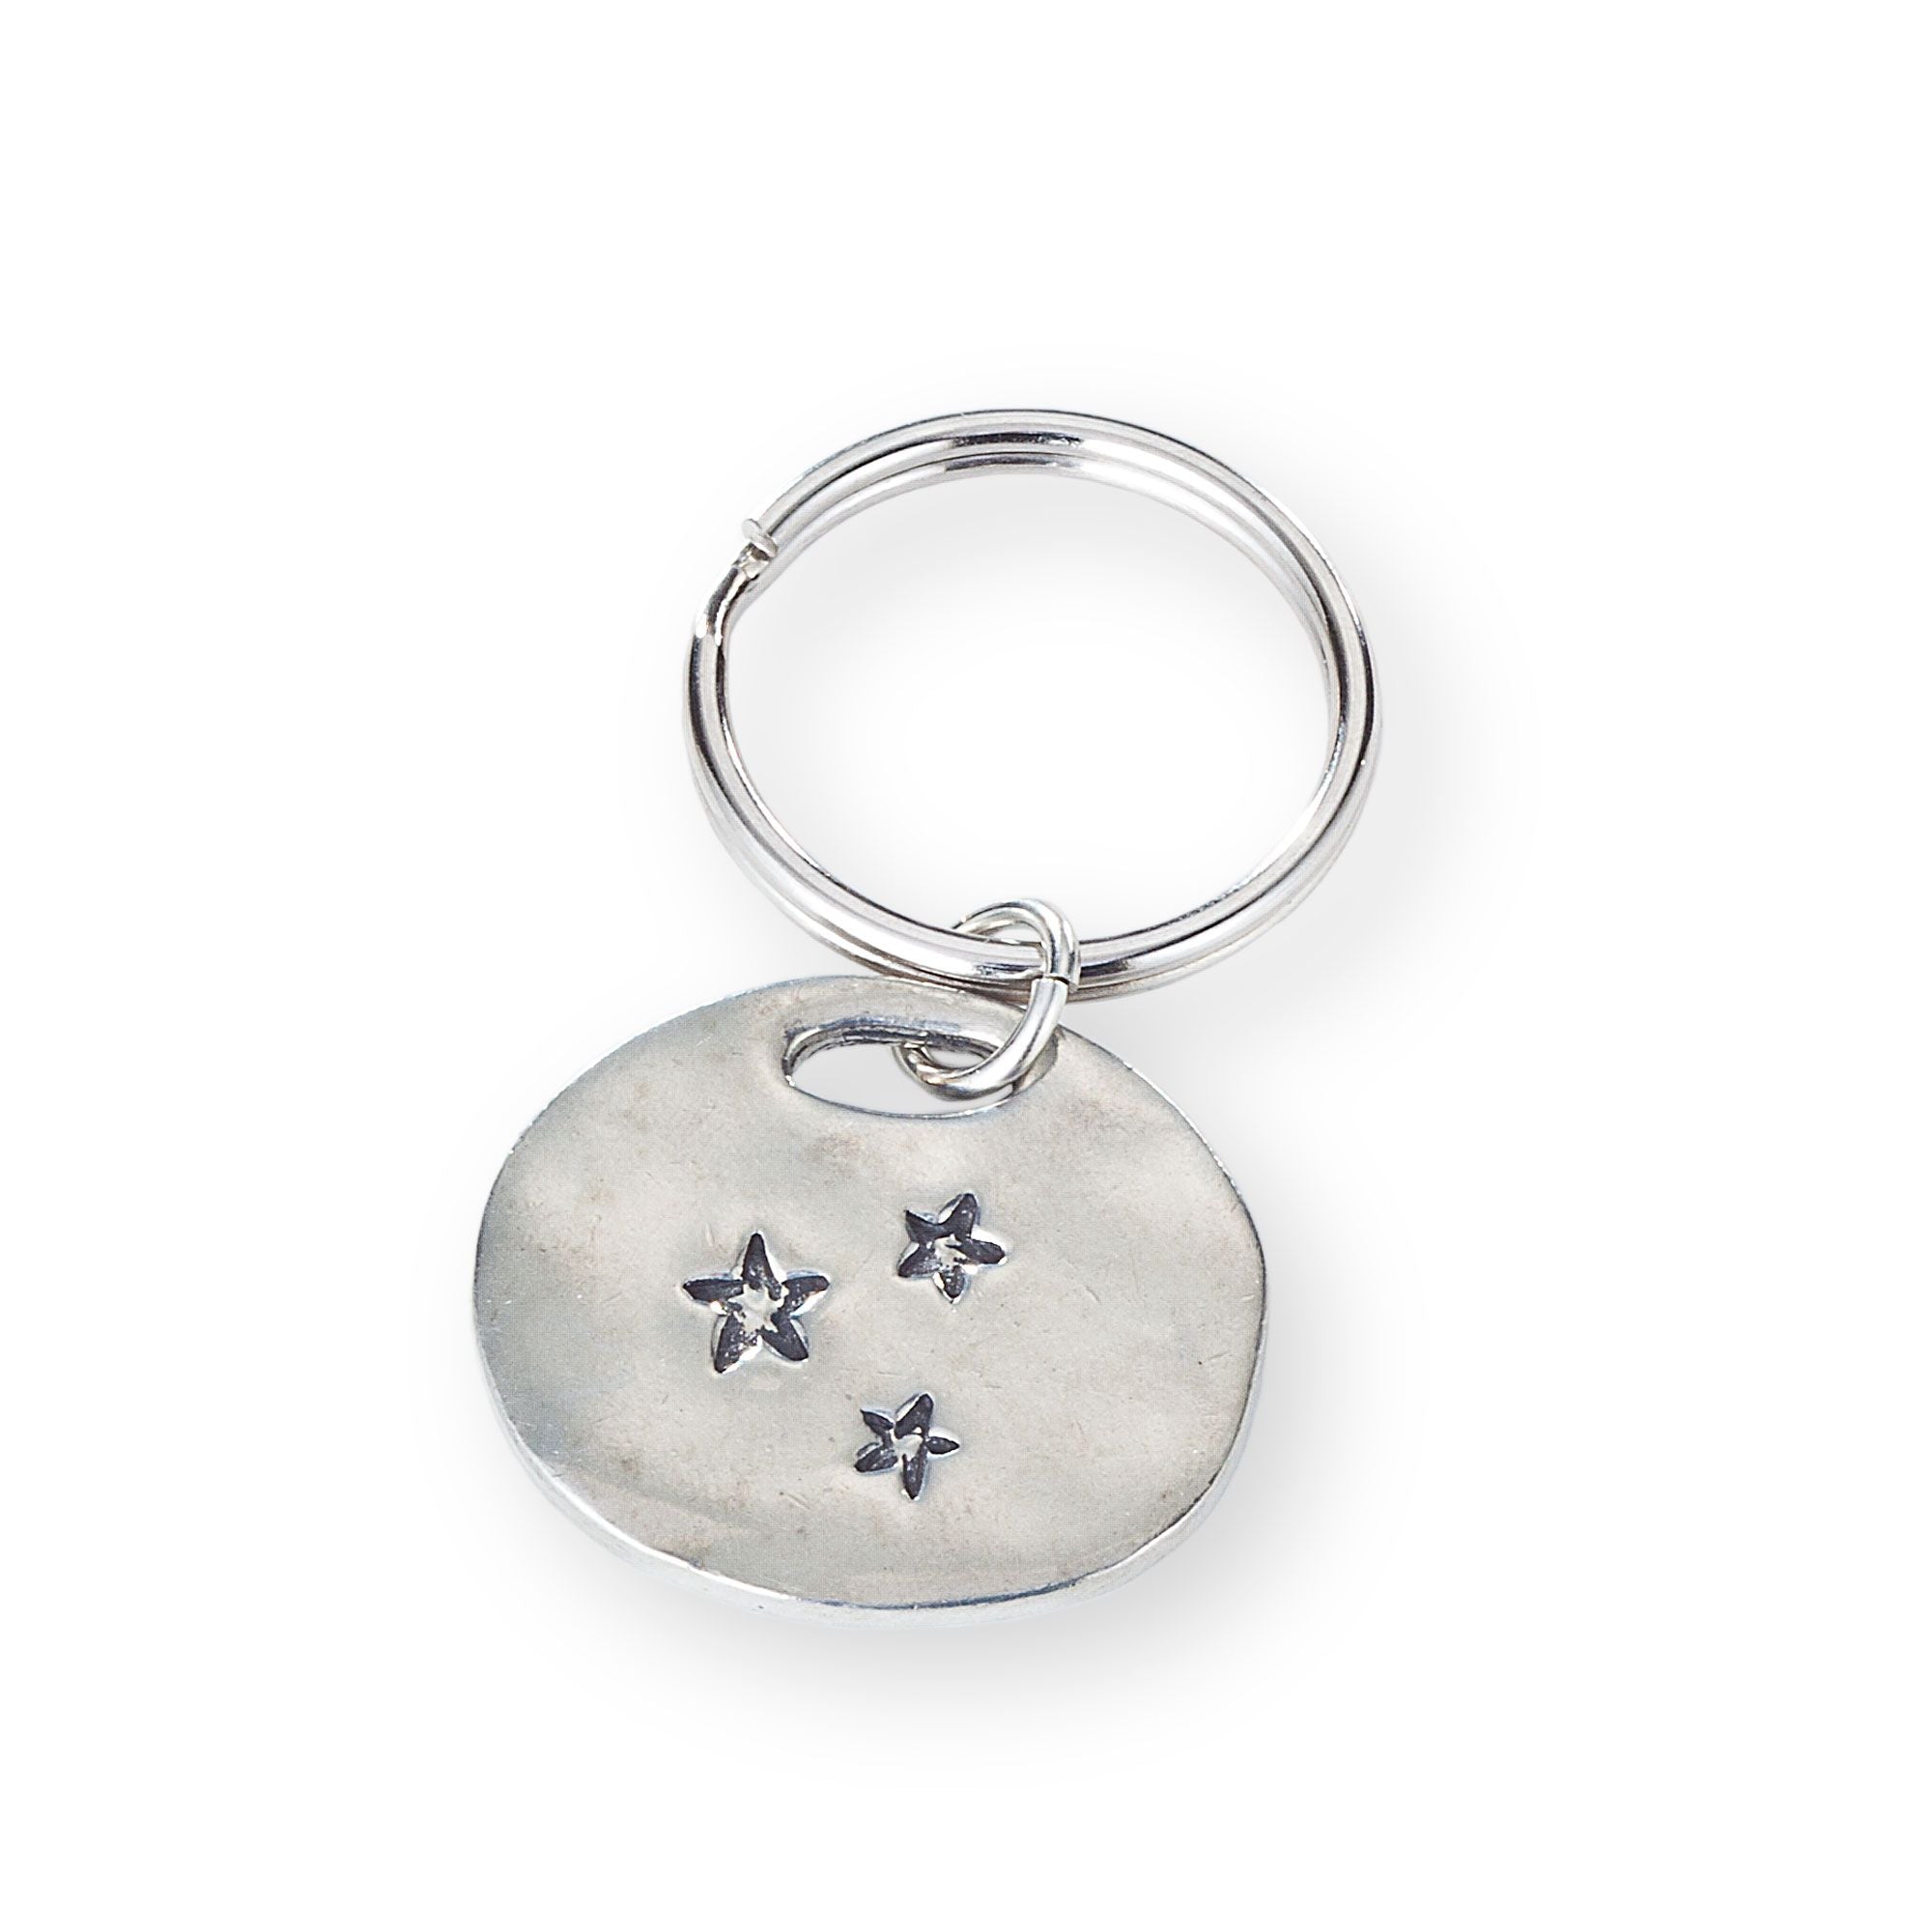 Pewter Follow Your Dreams Keychain